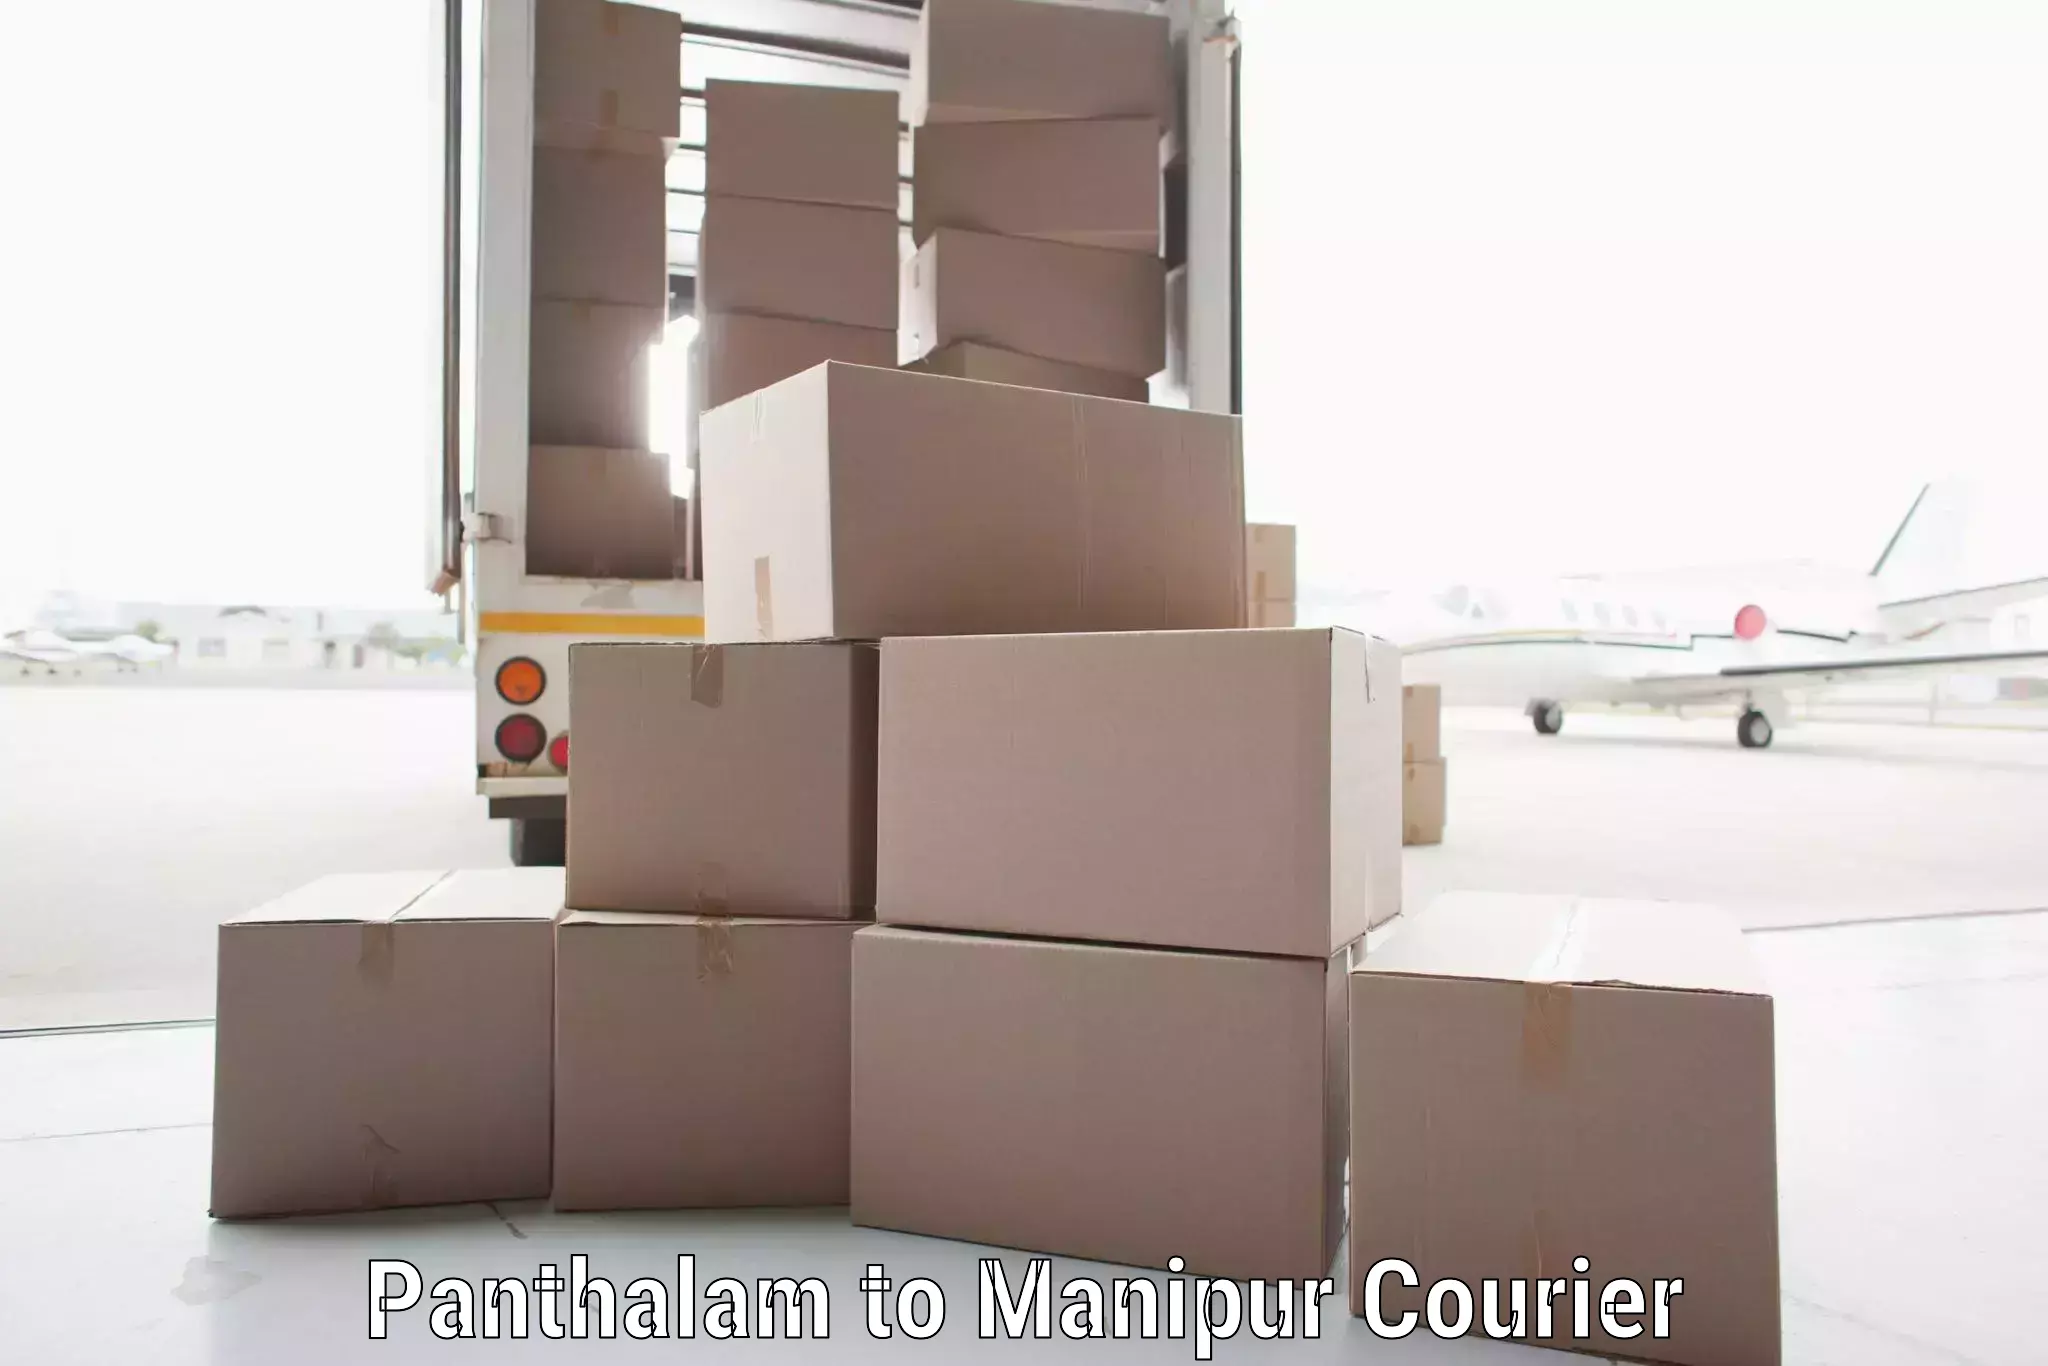 Courier dispatch services Panthalam to Tamenglong